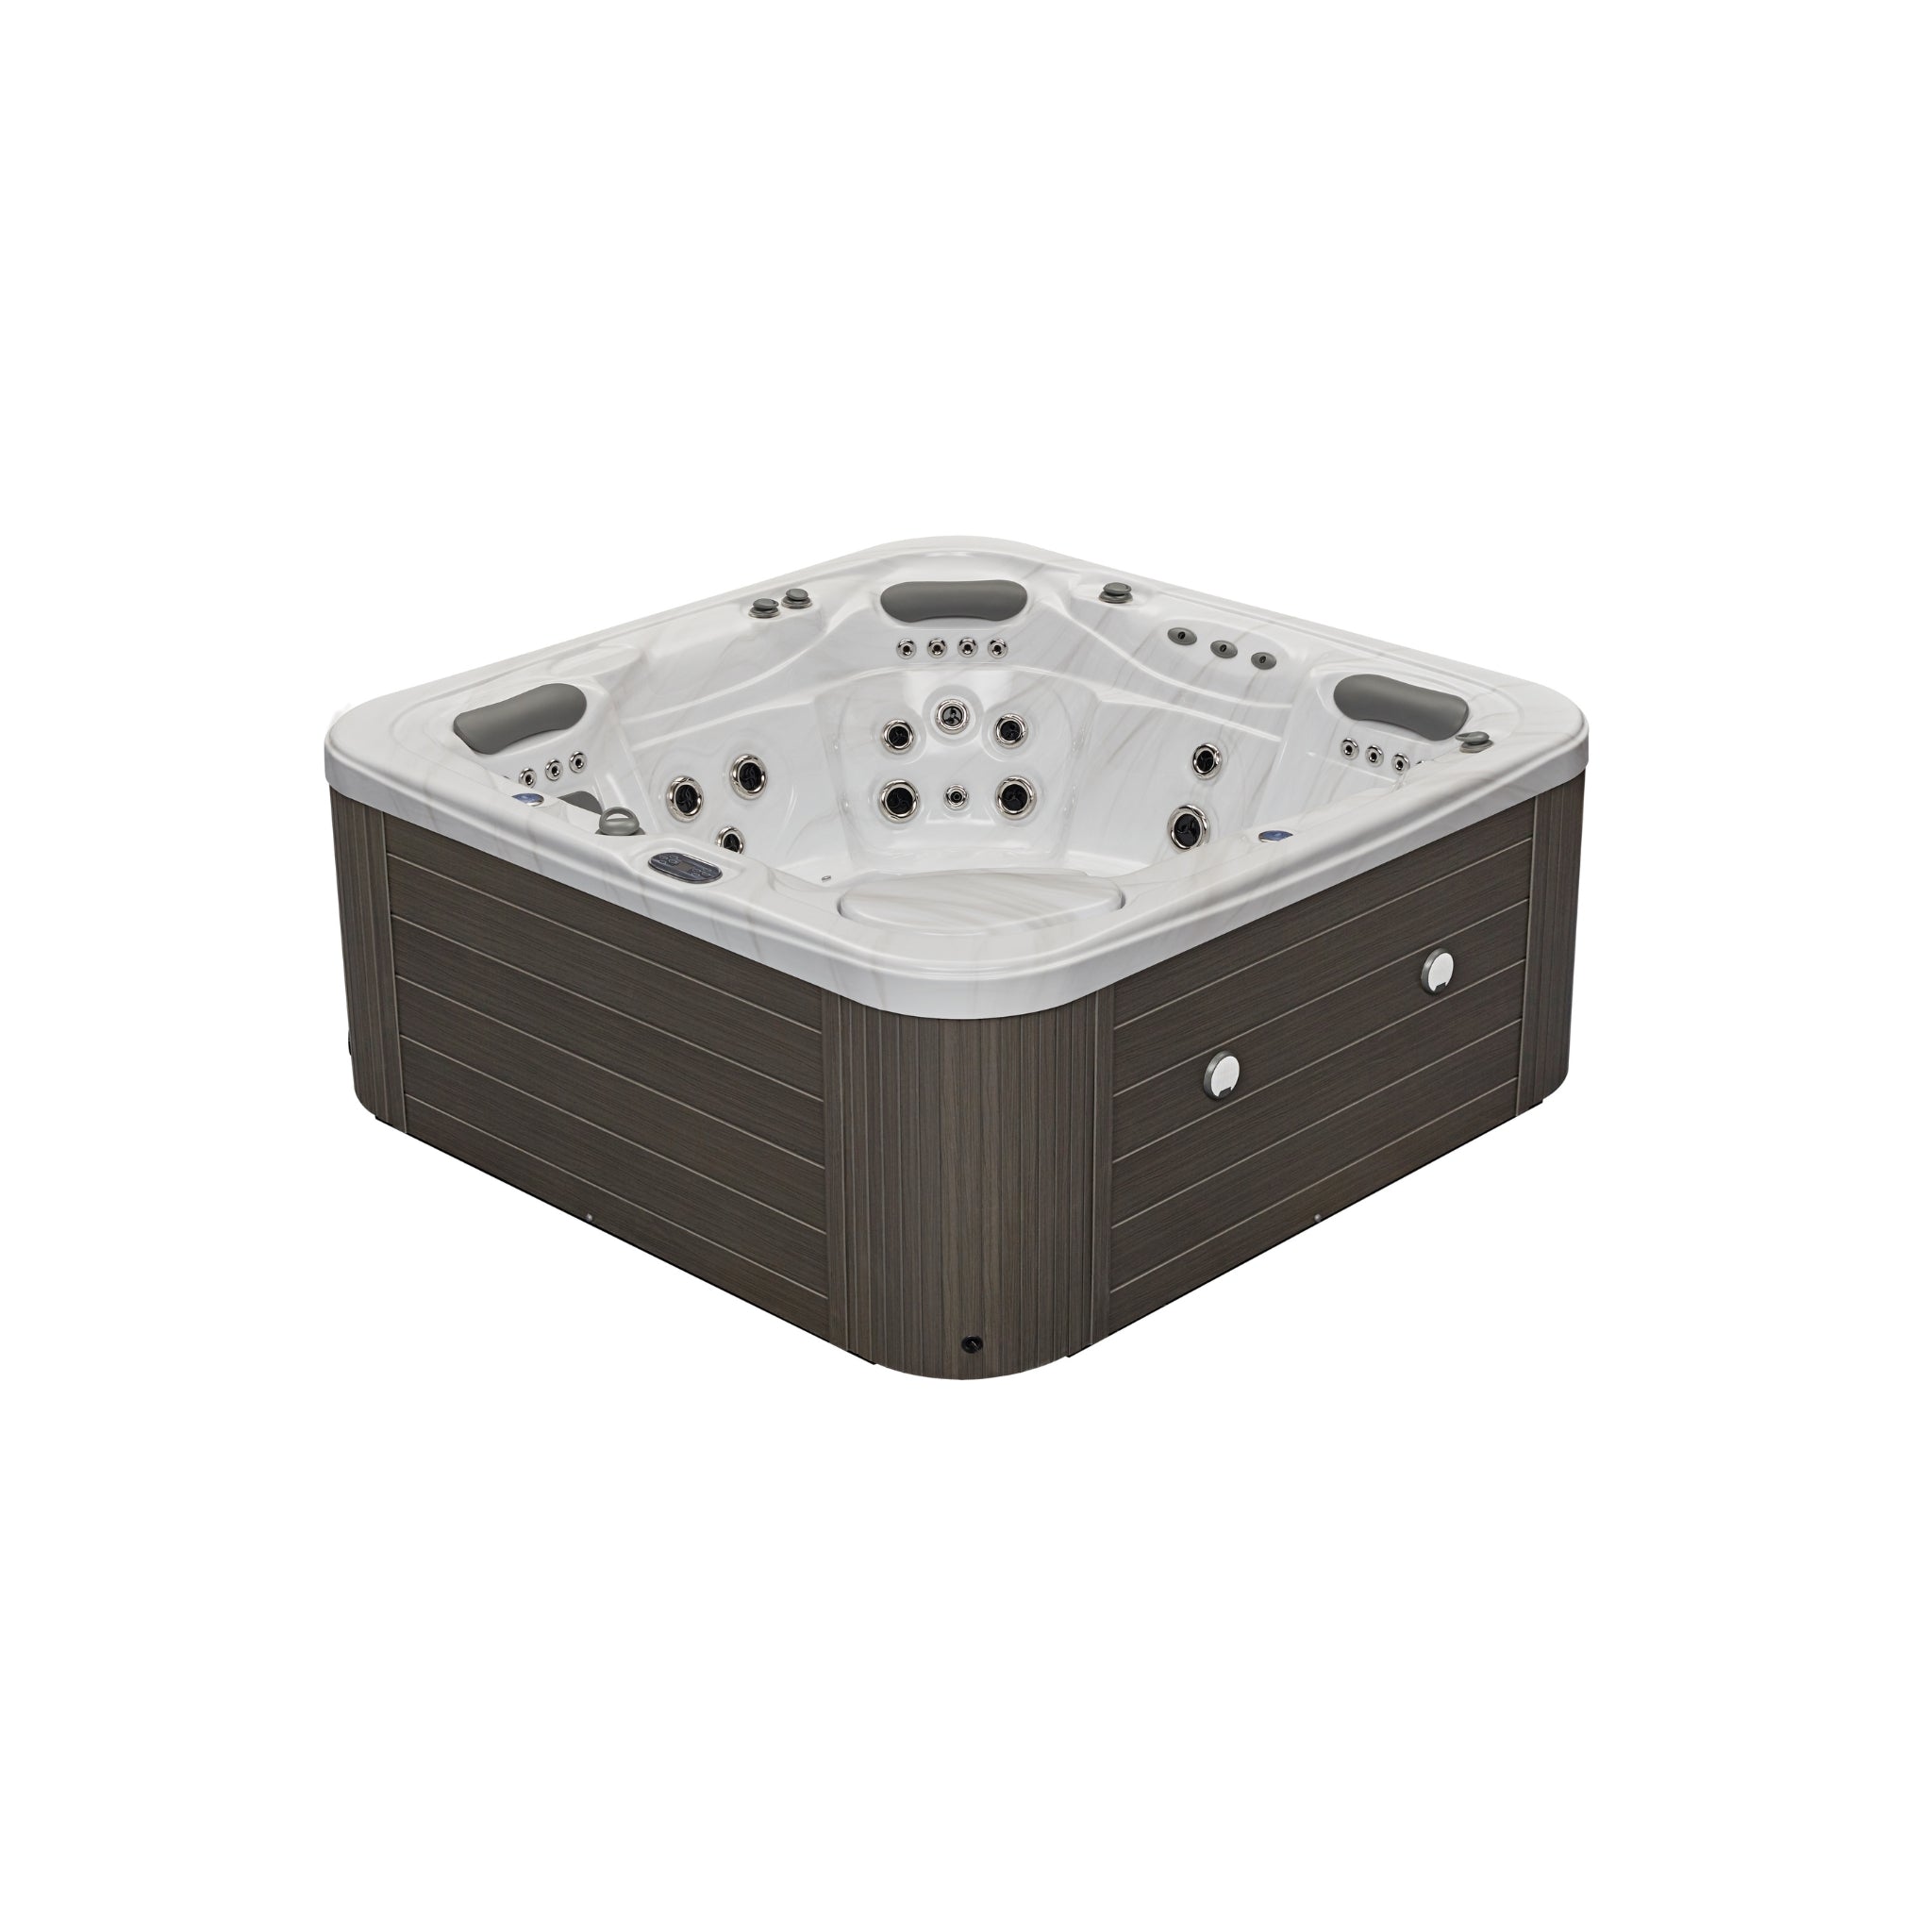 Infinity 5-Person 77 Jet Dual Lounger hot Tub with Bluetooth